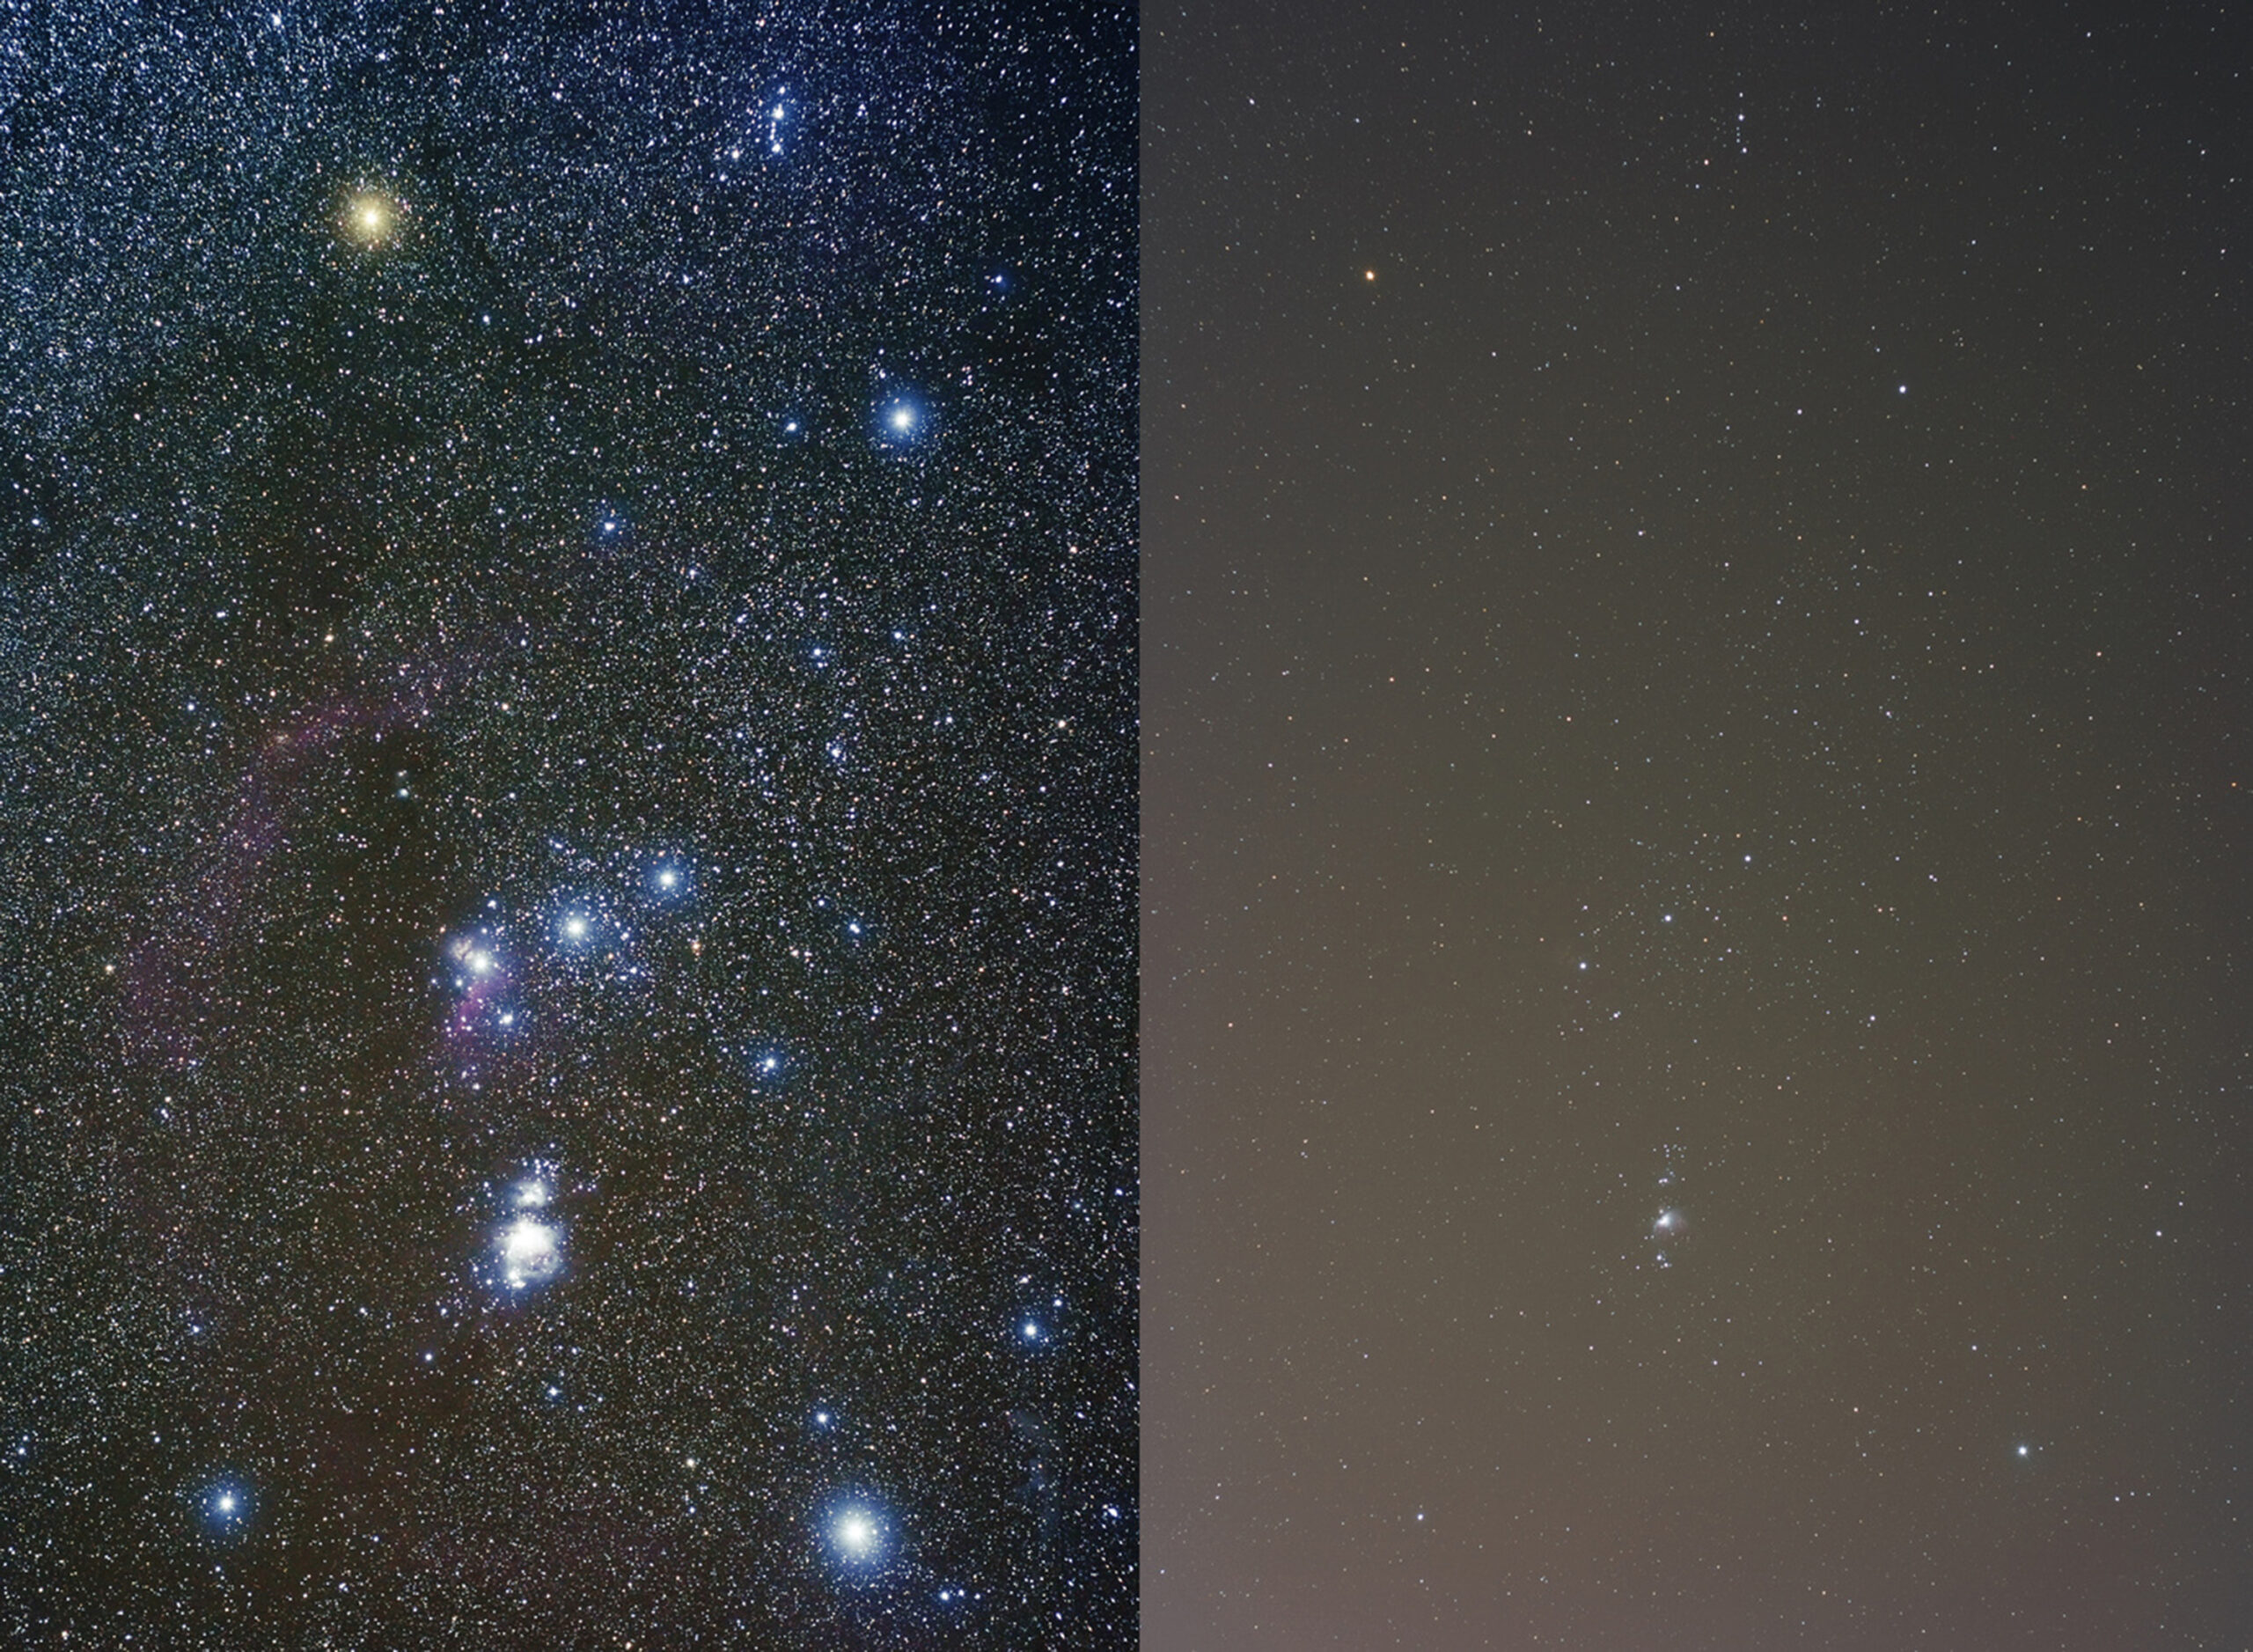 The constellation Orion, imaged at left from dark skies, and at right from the teeming metropolis of Orem, UT comprising about half a million people.